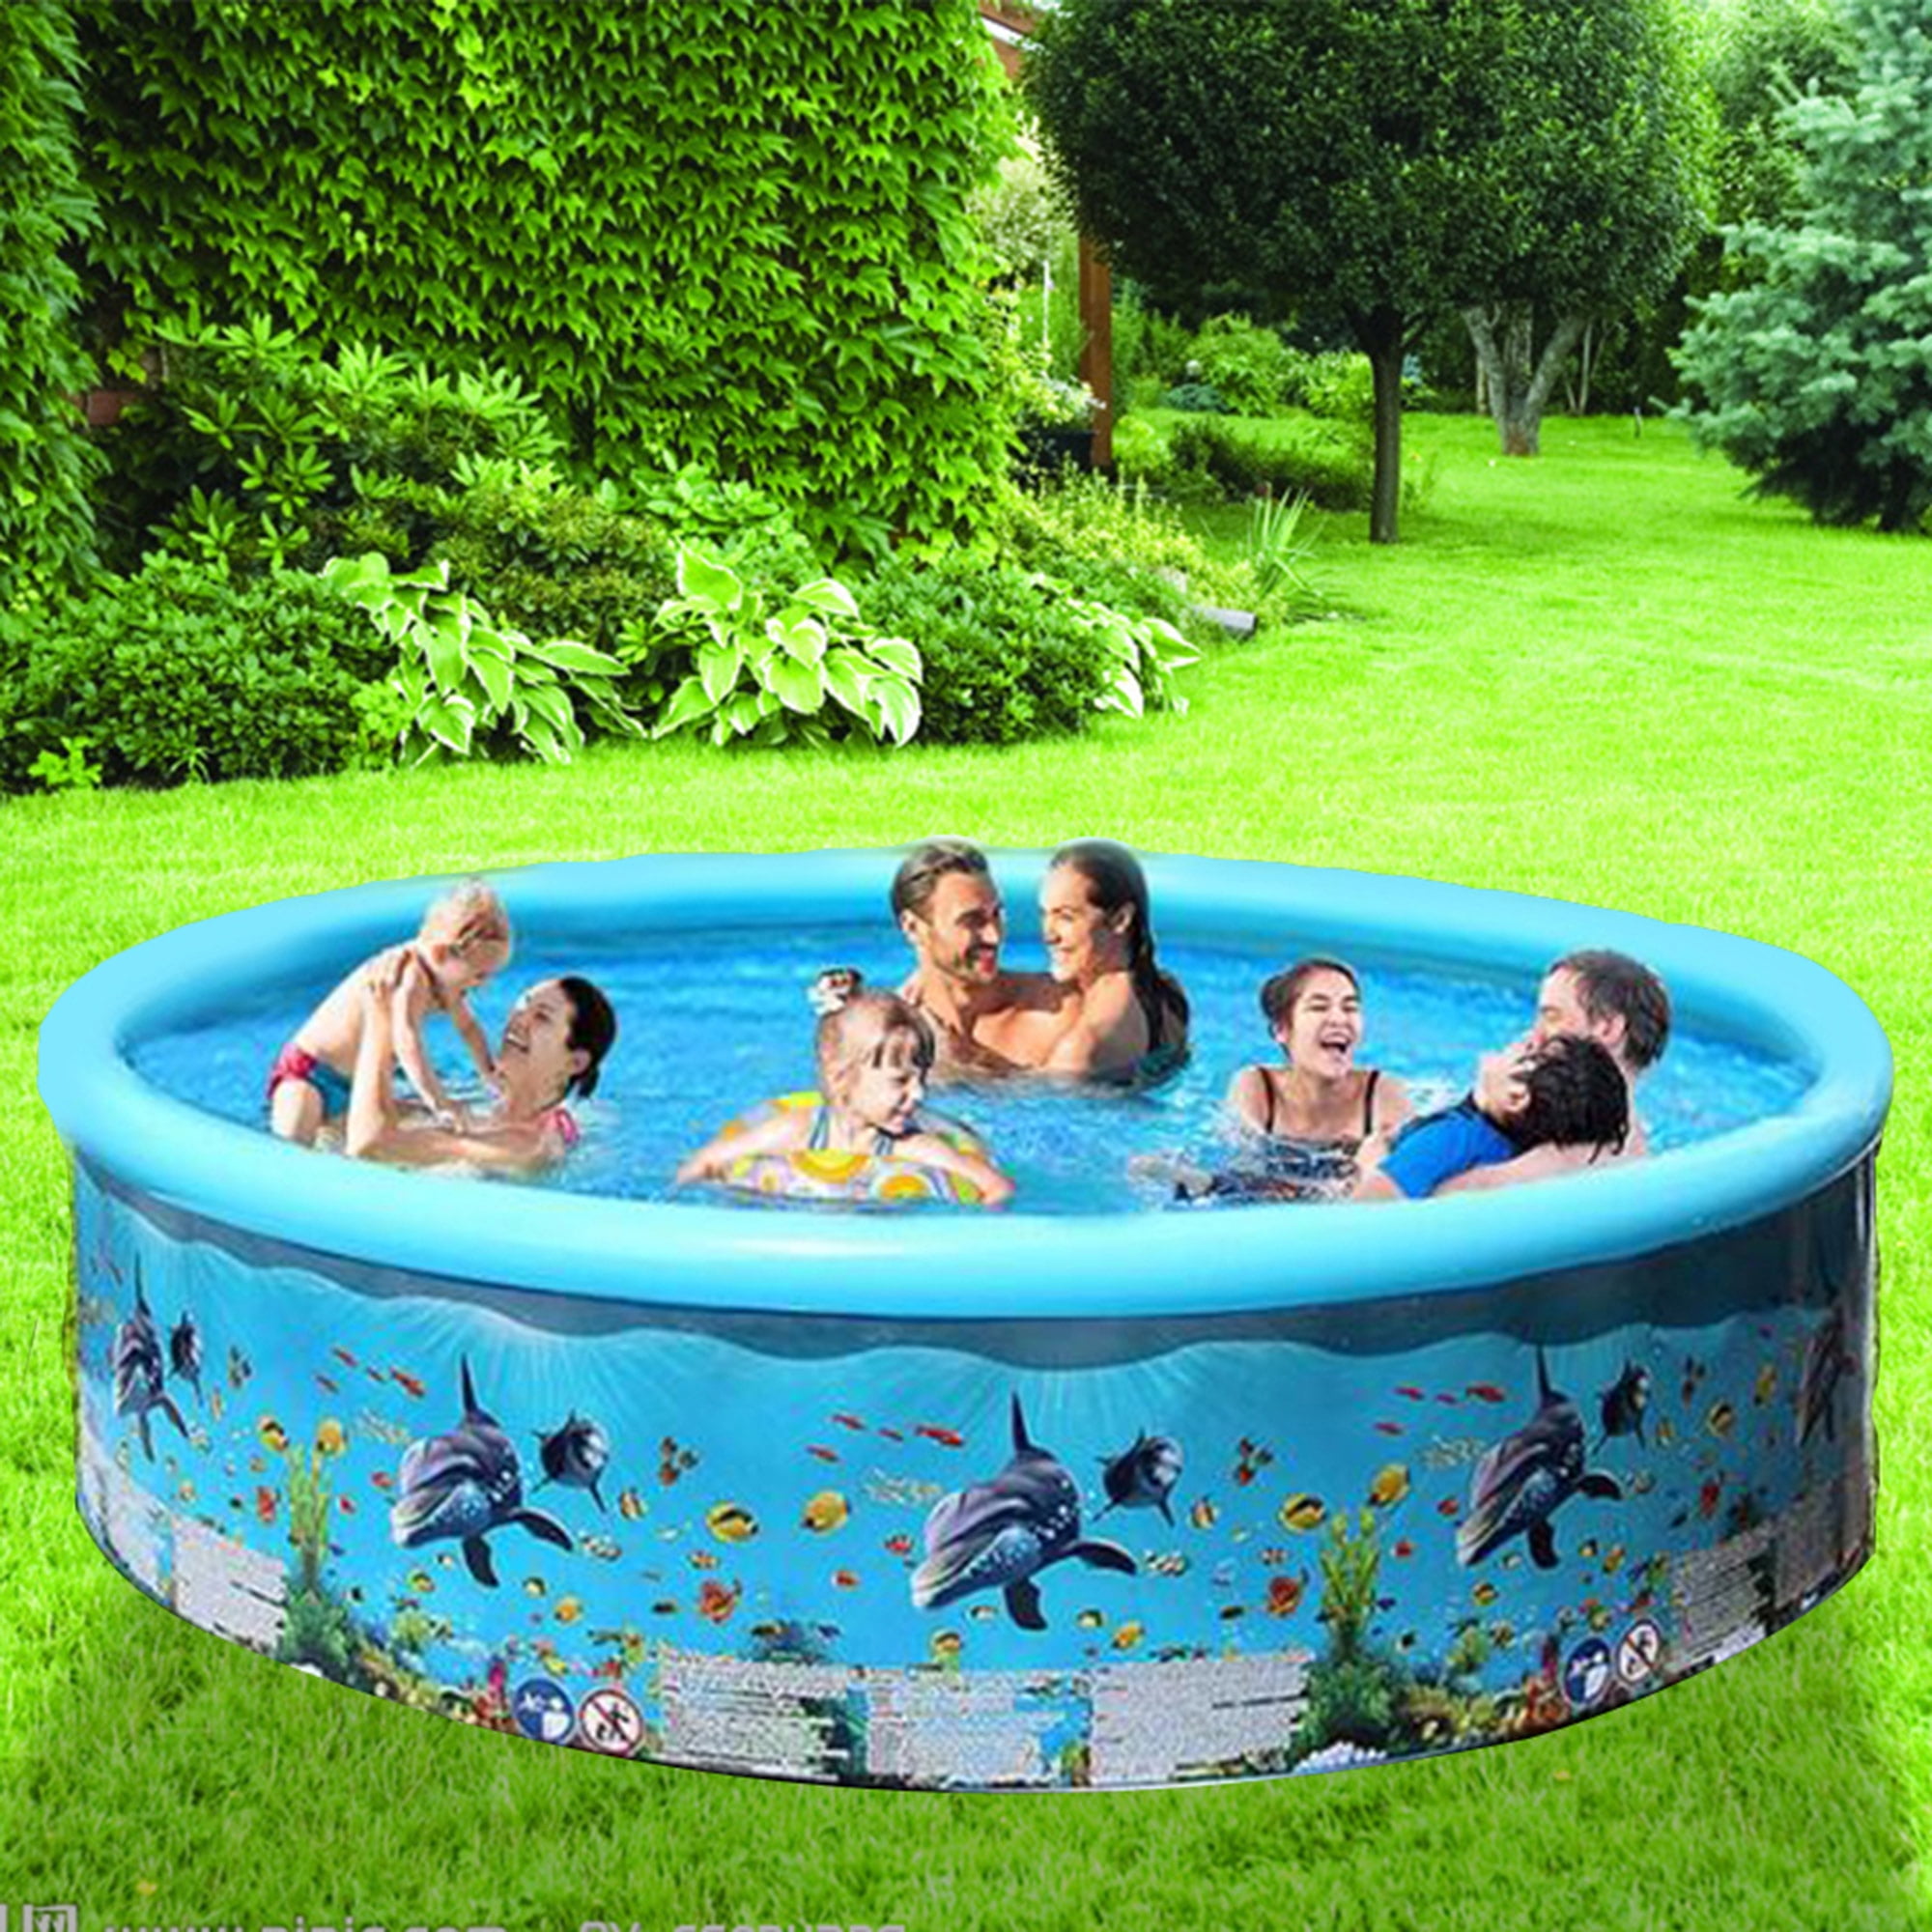 Inflatable Swimming Pool Family Kids Adults Outdoor Above Ground Garden Patio 